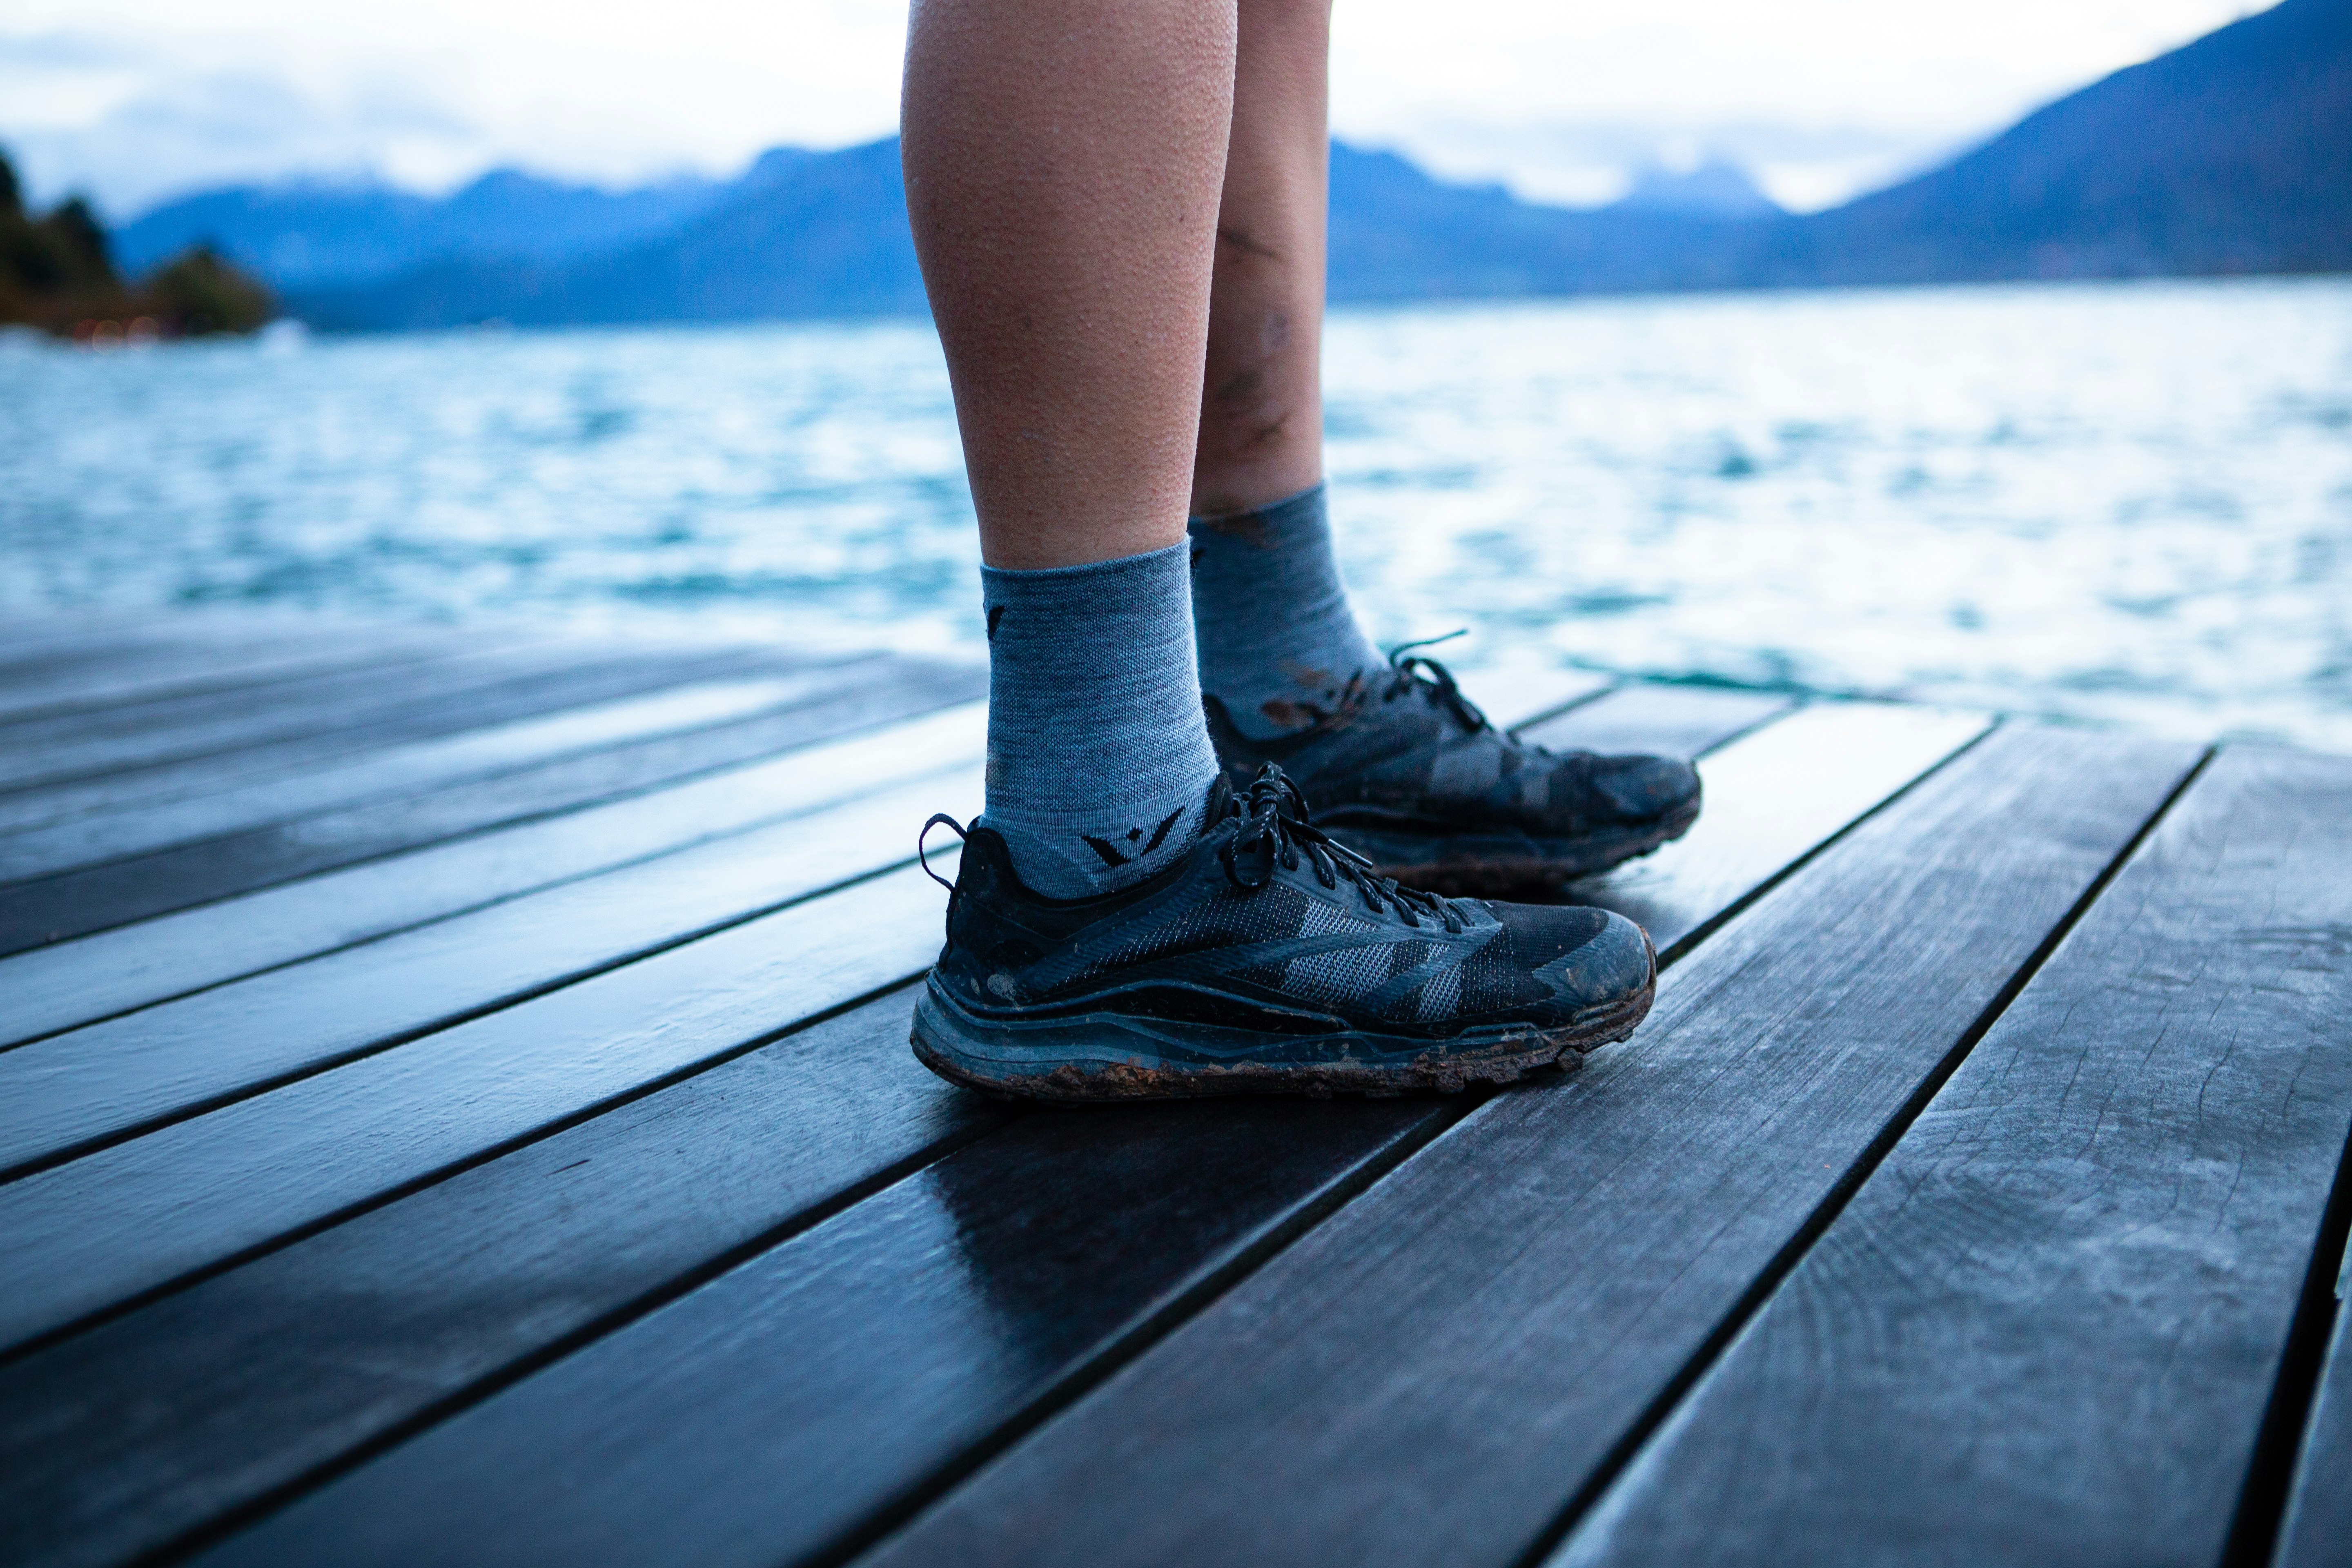 Comfy socks and muddy trail shoes stand on a dock near a lake